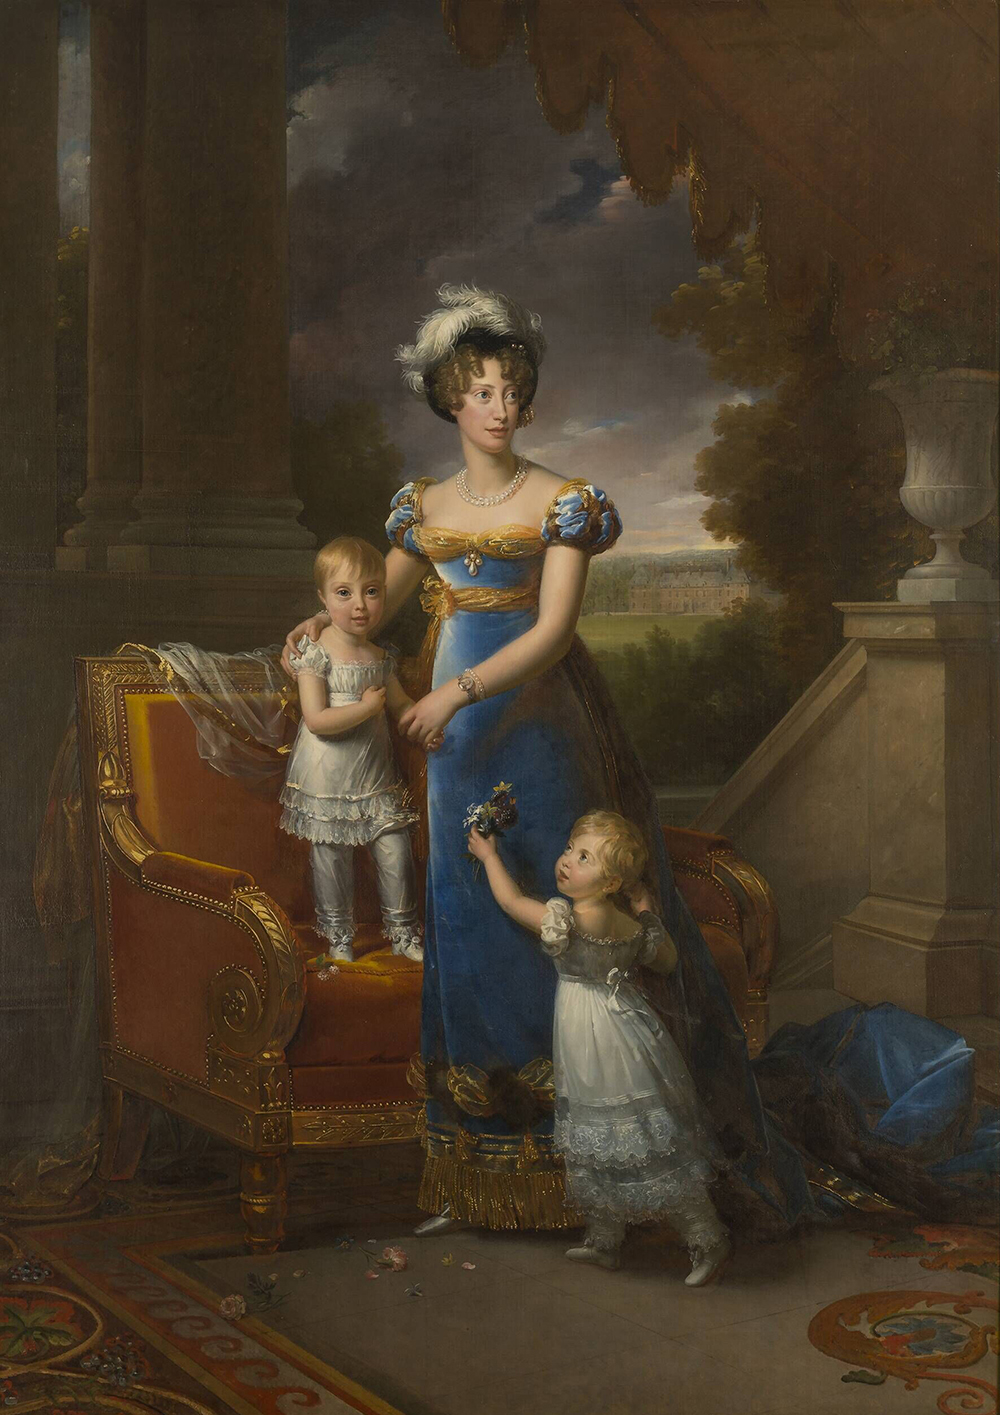 Duchesse de Berry and Her Children, by François Gérard, 1820. Wikimedia Commons, Palace of Versailles.